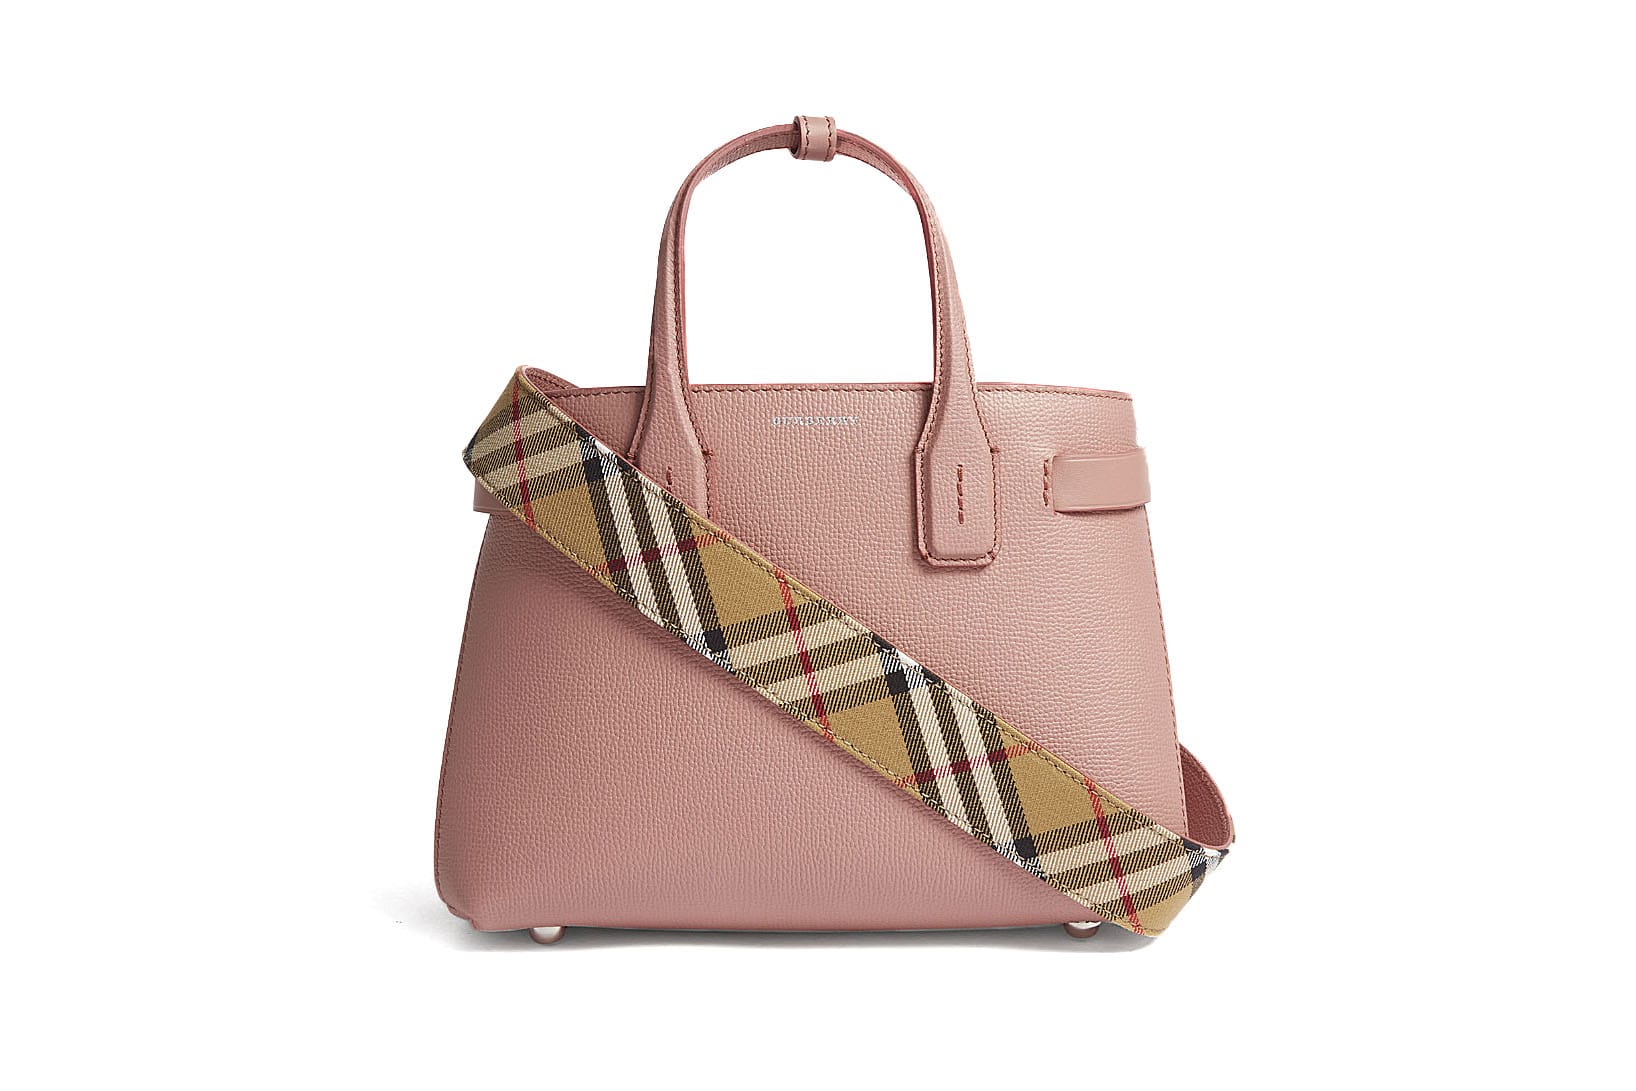 new burberry bags 2018